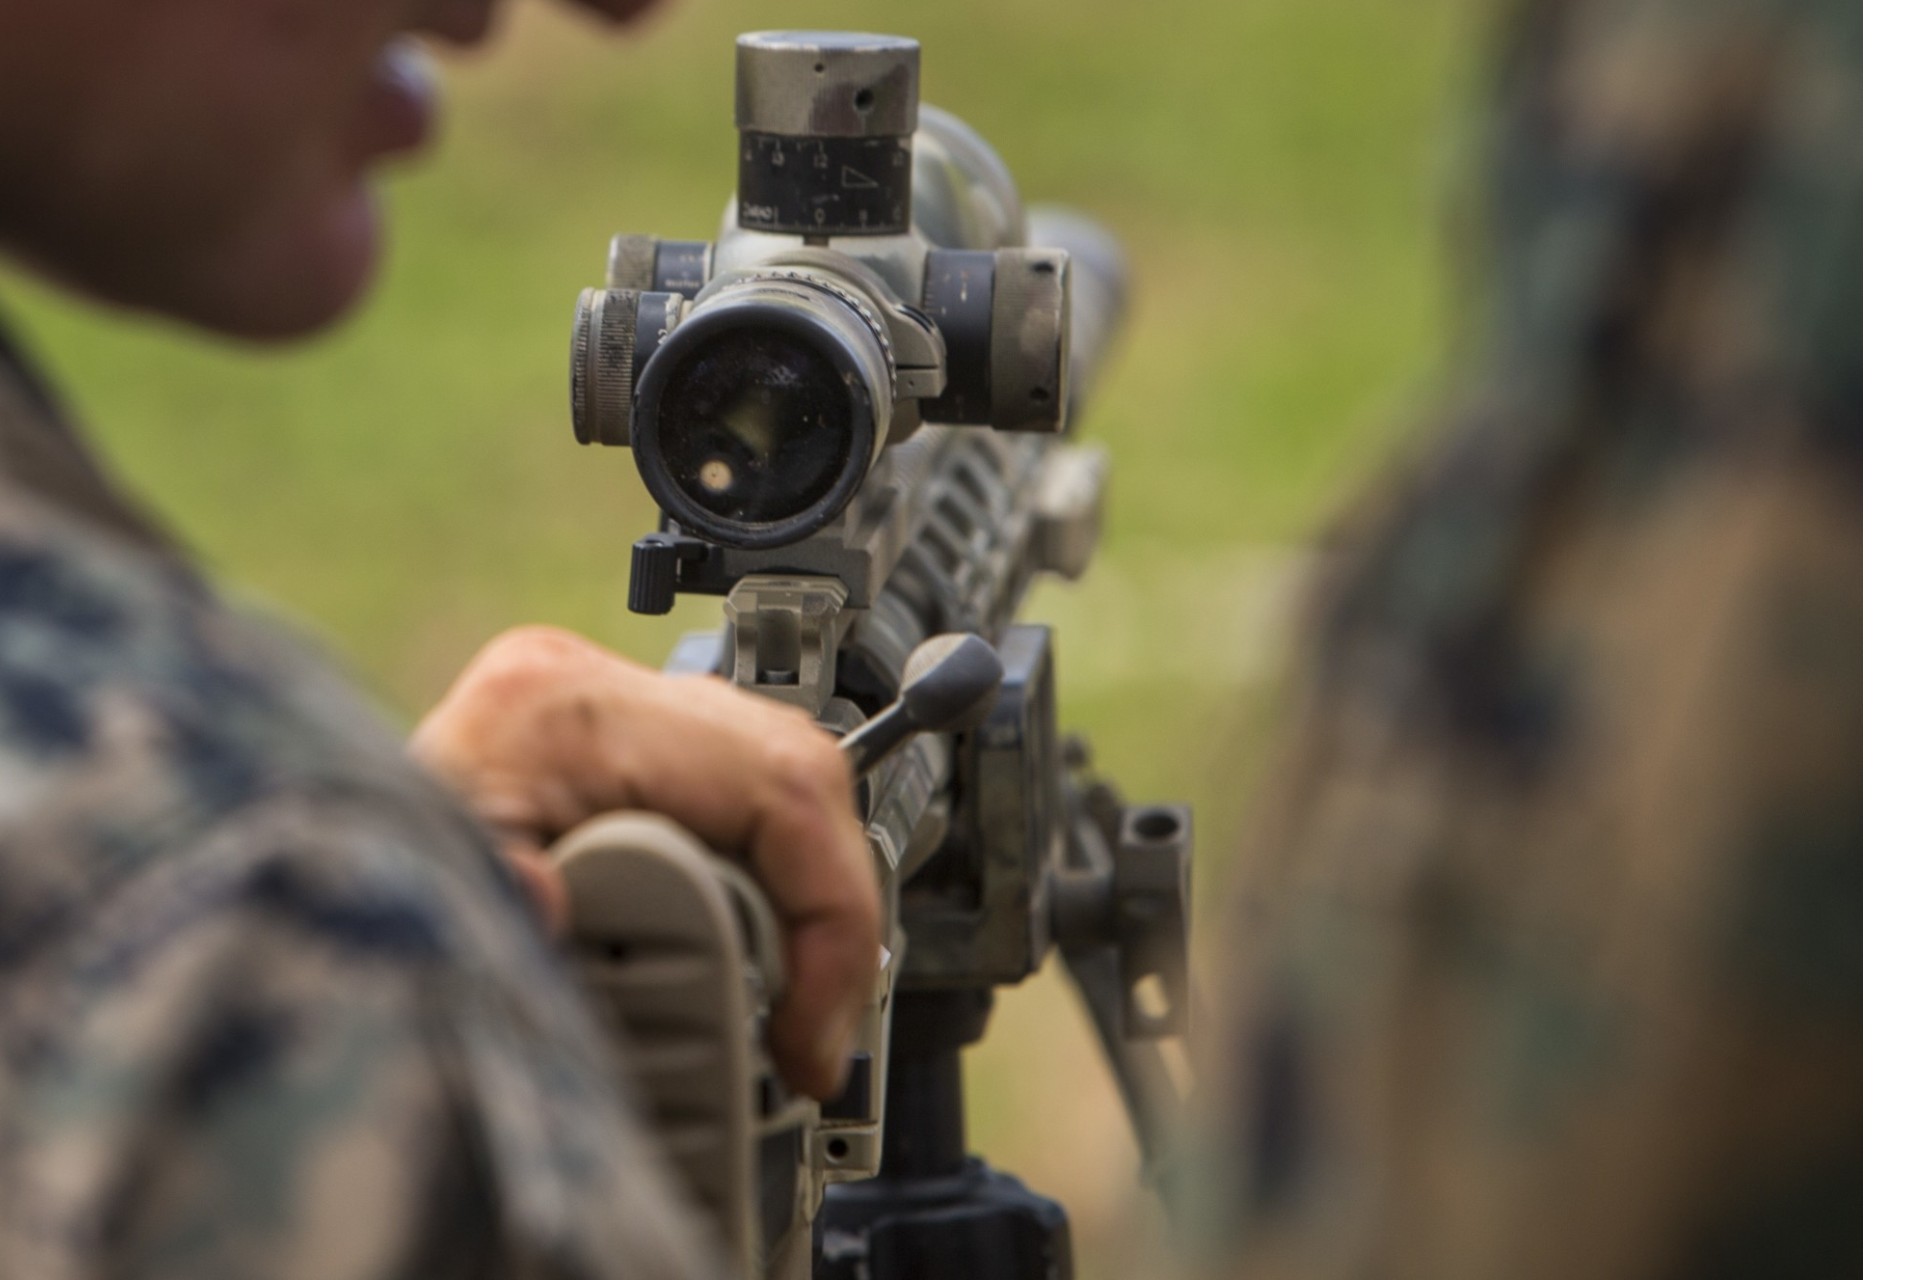 7 Factors to consider when buying Used Scopes